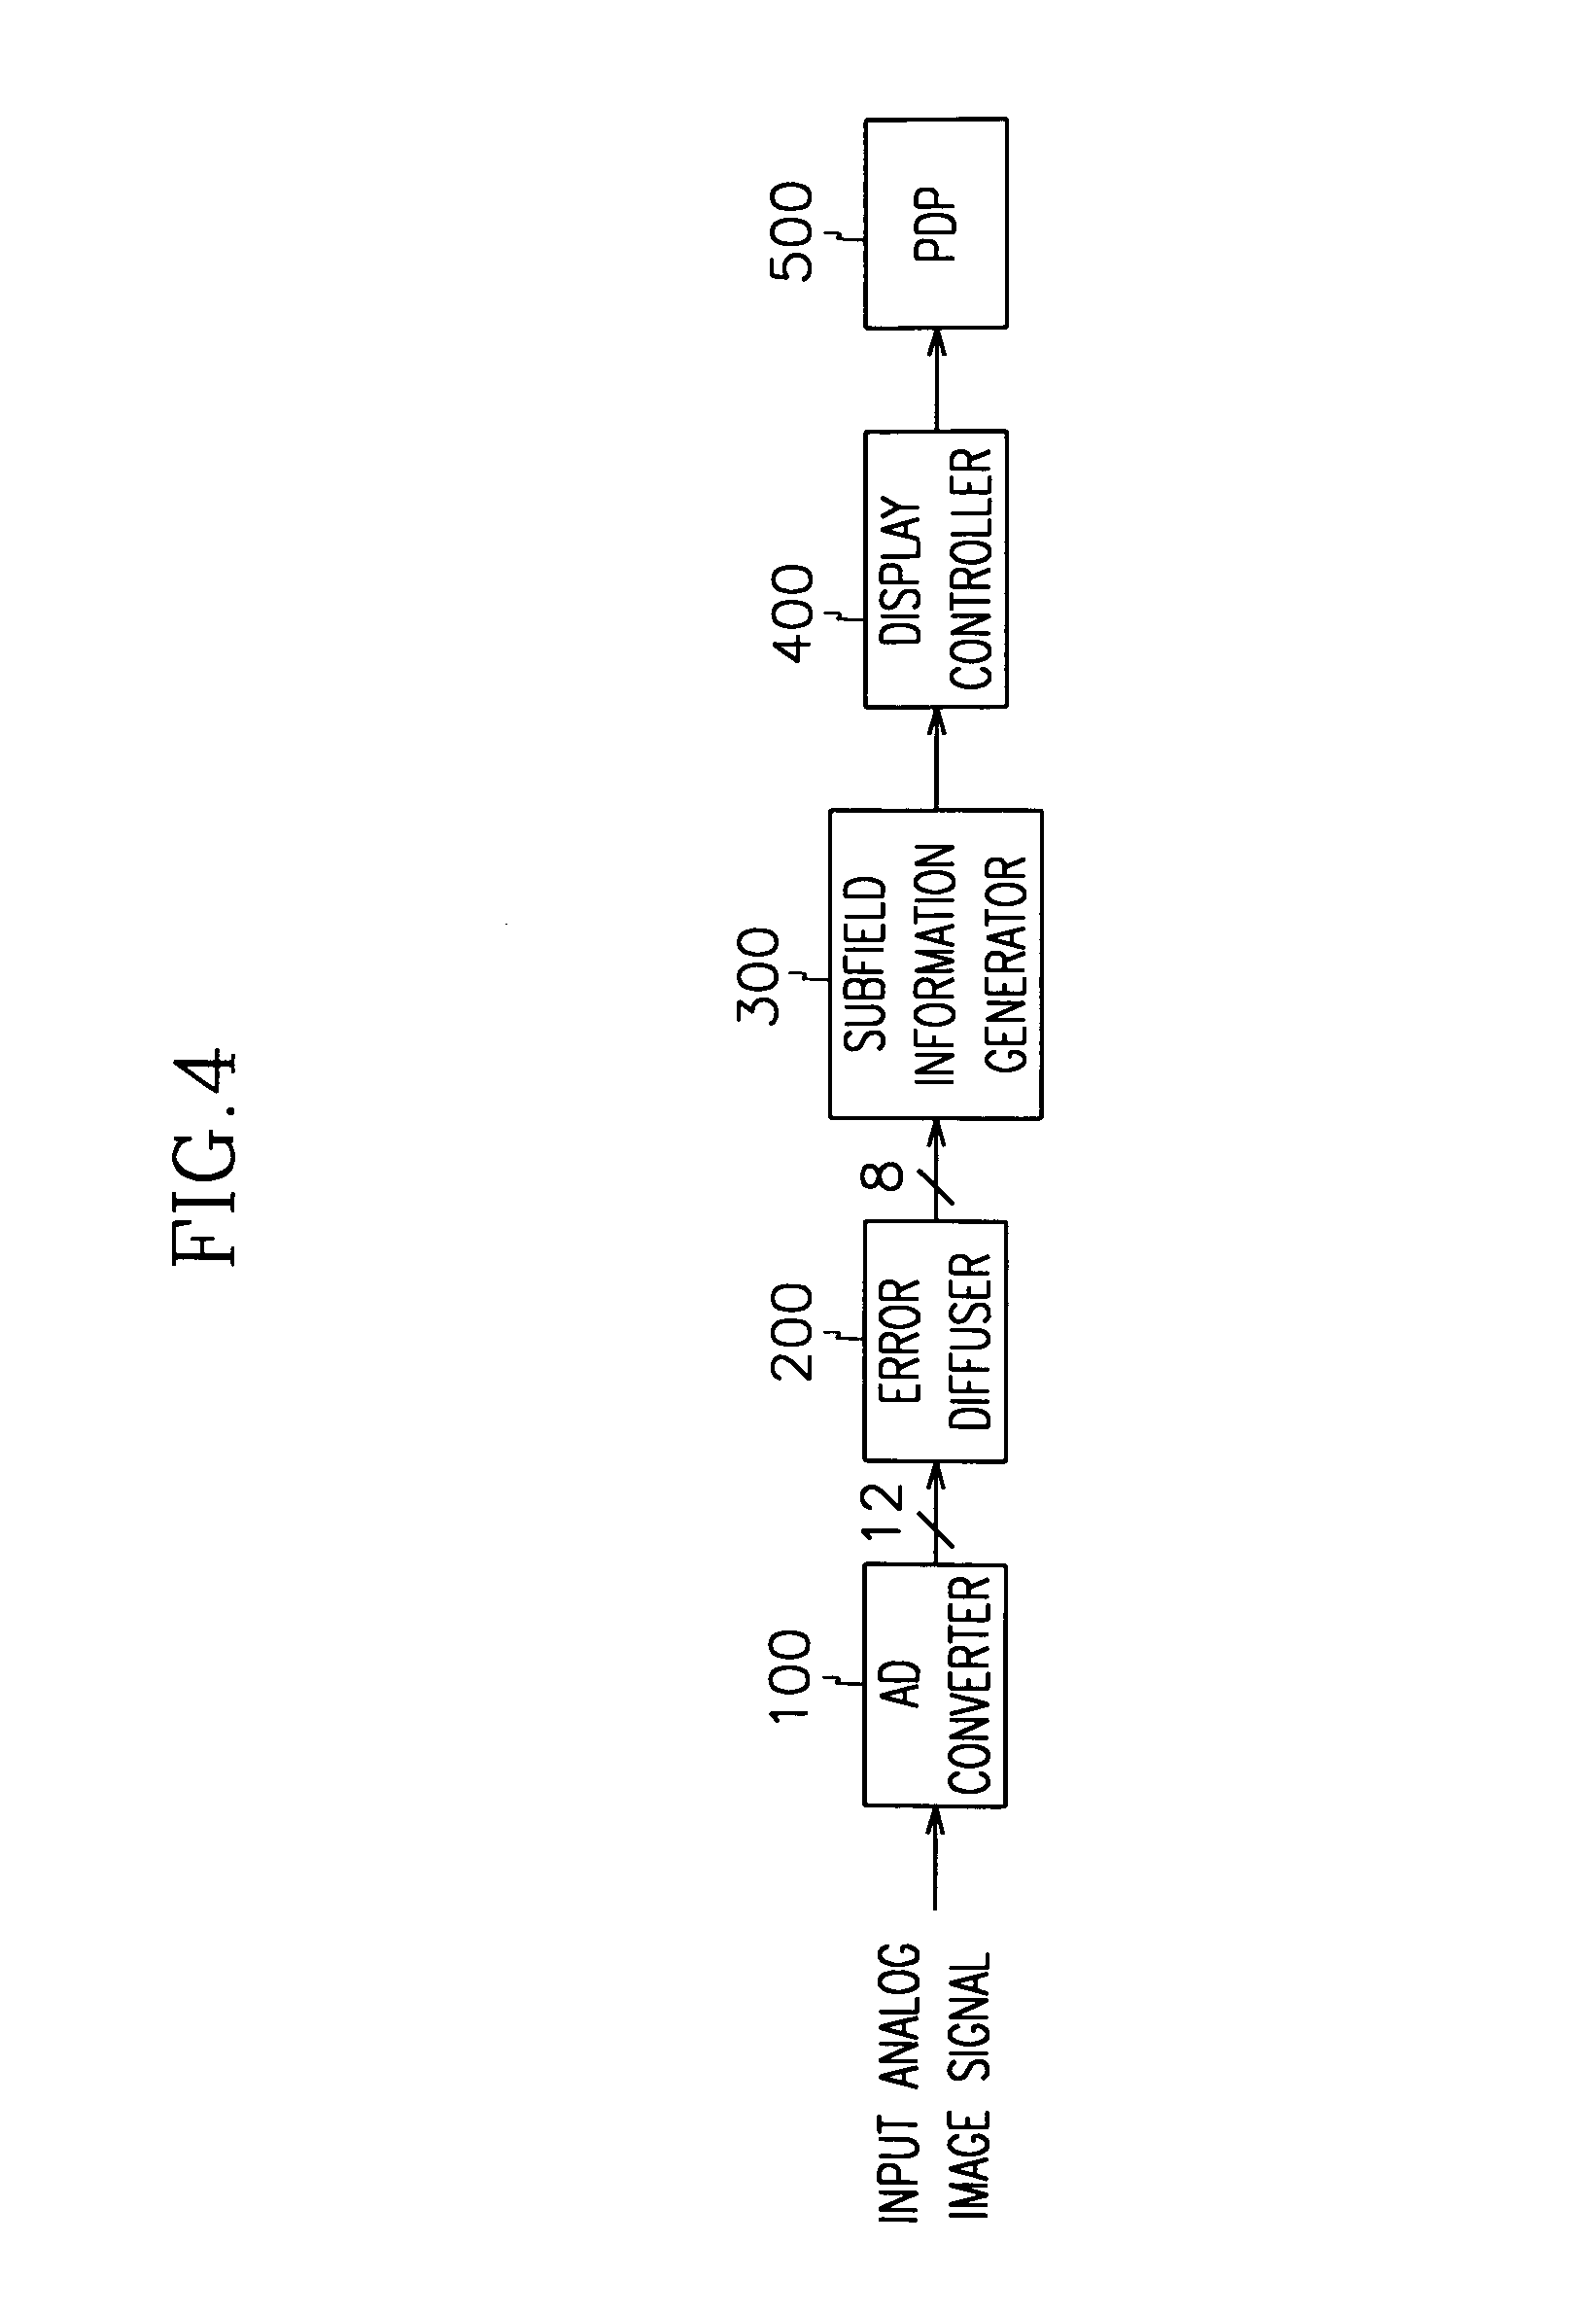 Multi-gray-scale image display method and apparatus thereof